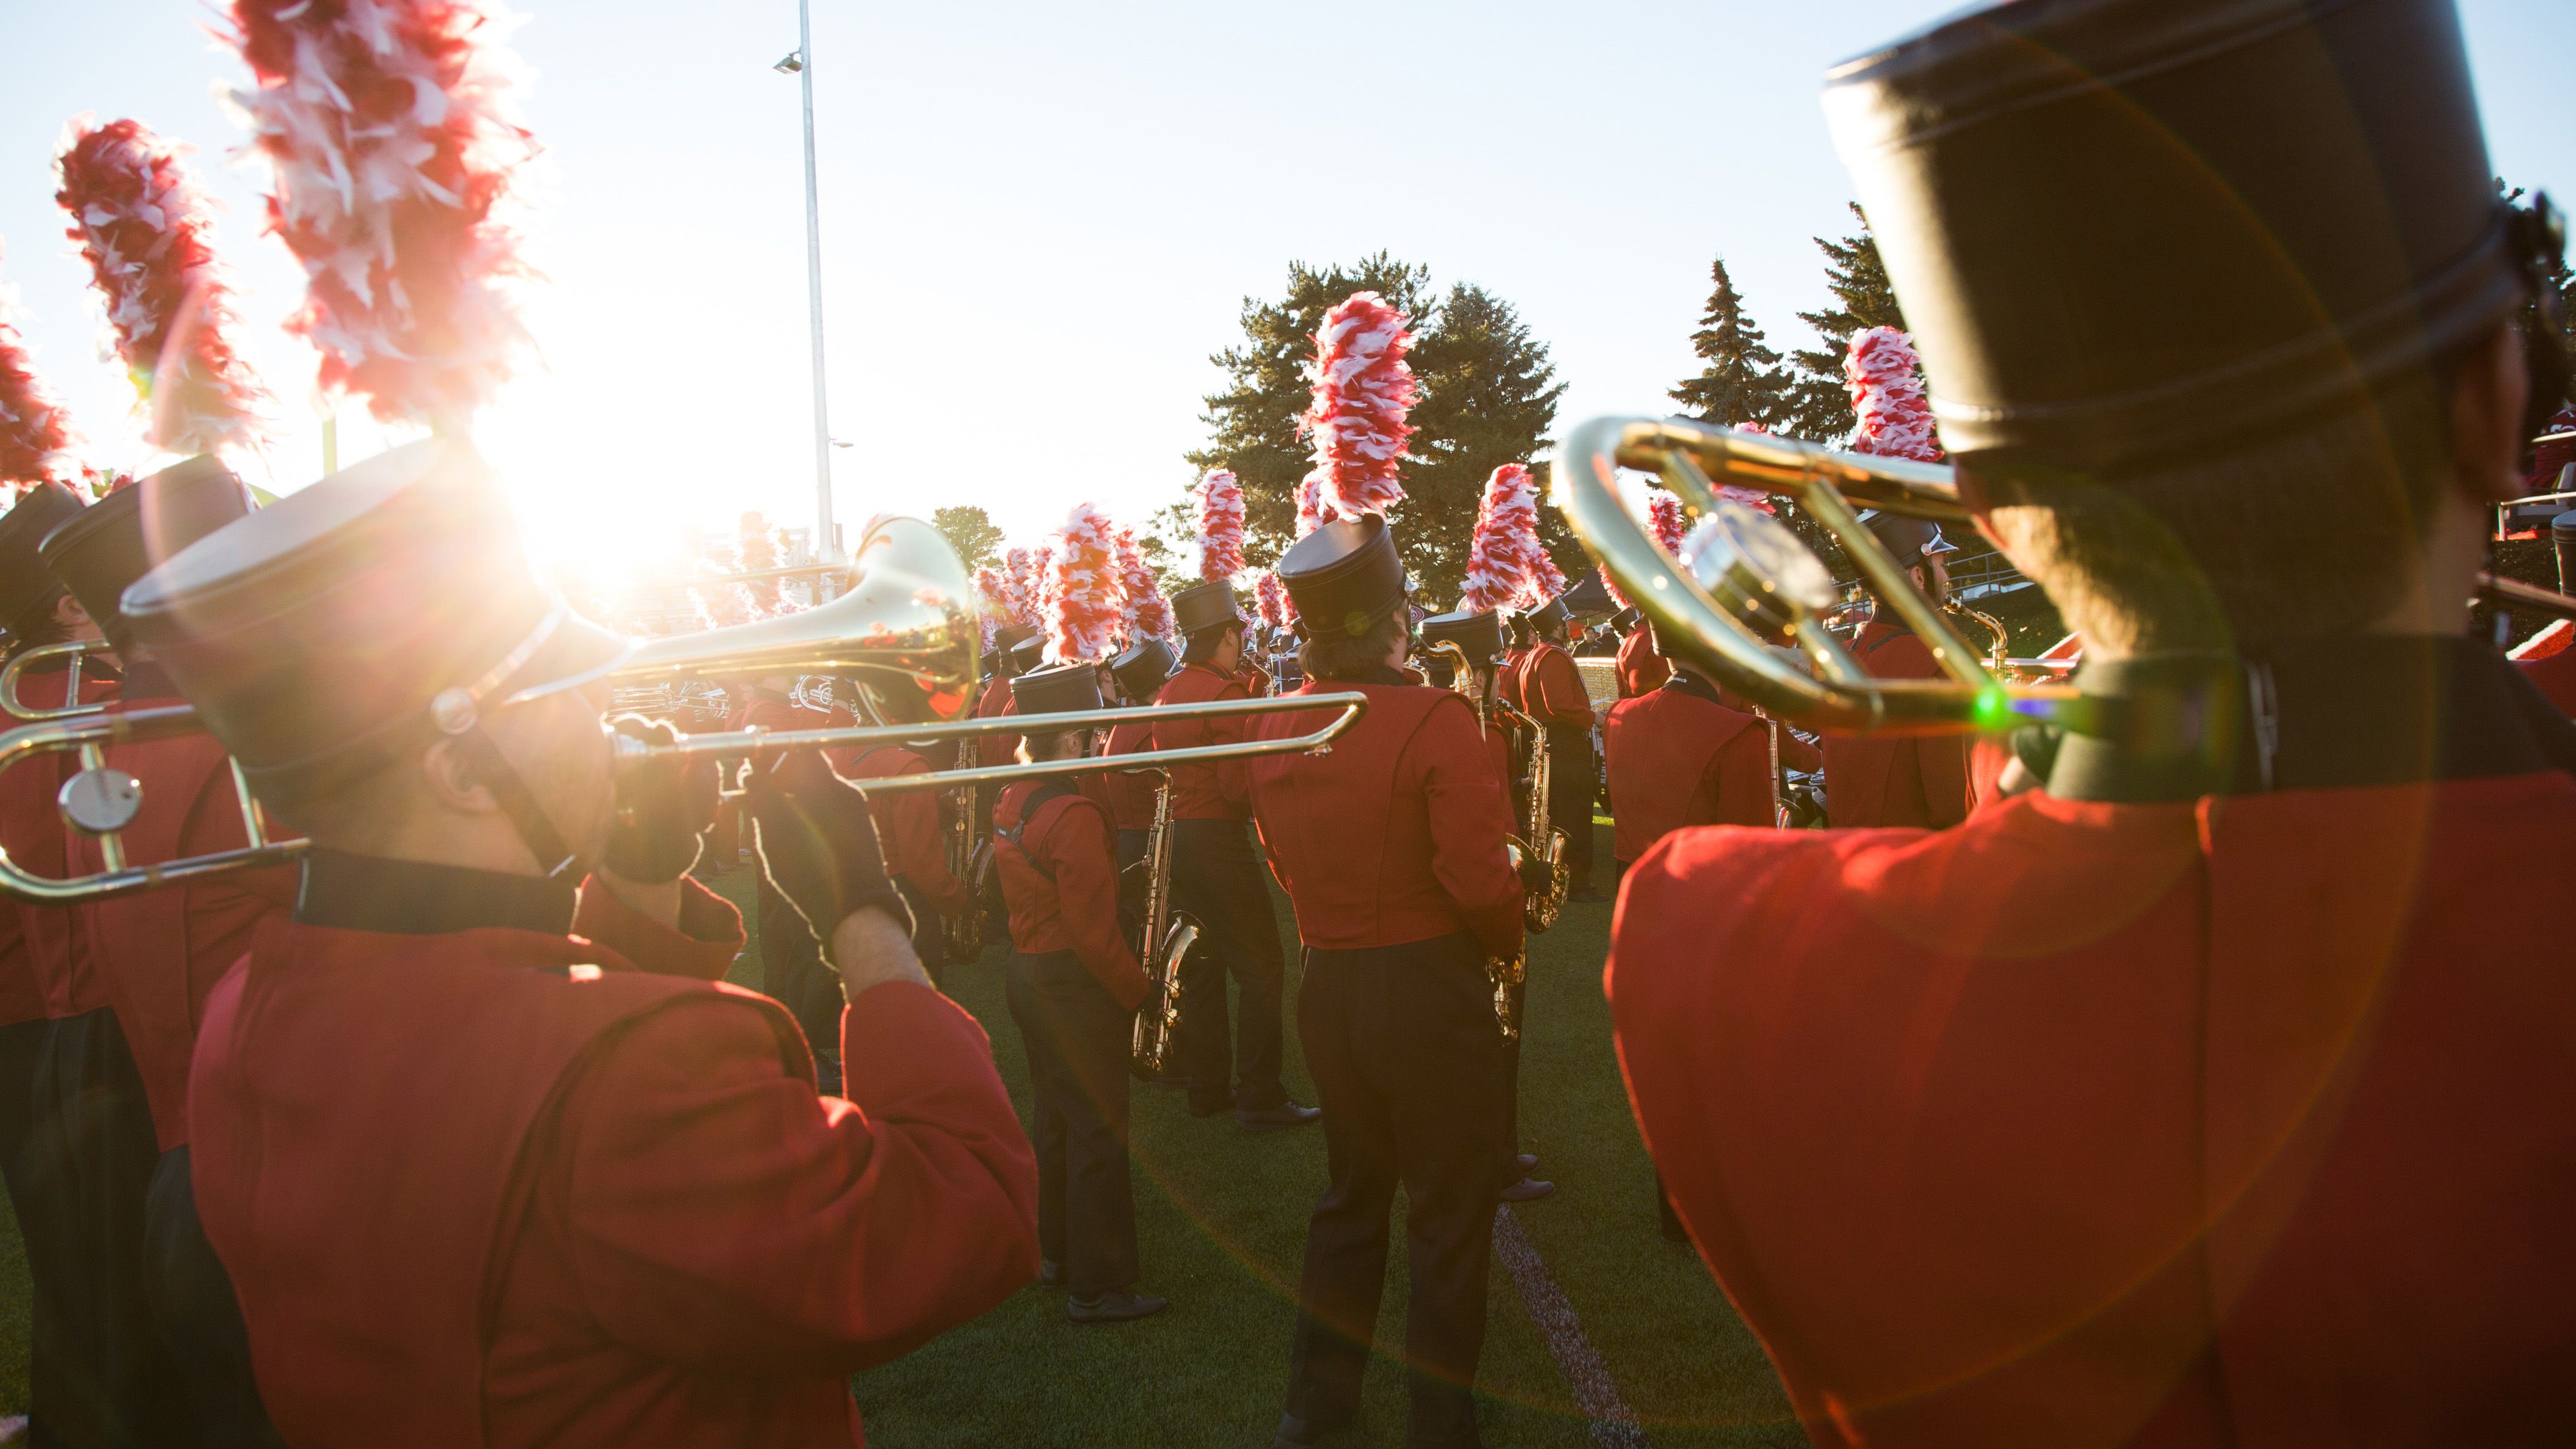 Central Washington University marching band puts on a show during a home football game at Tomlinson Stadium.